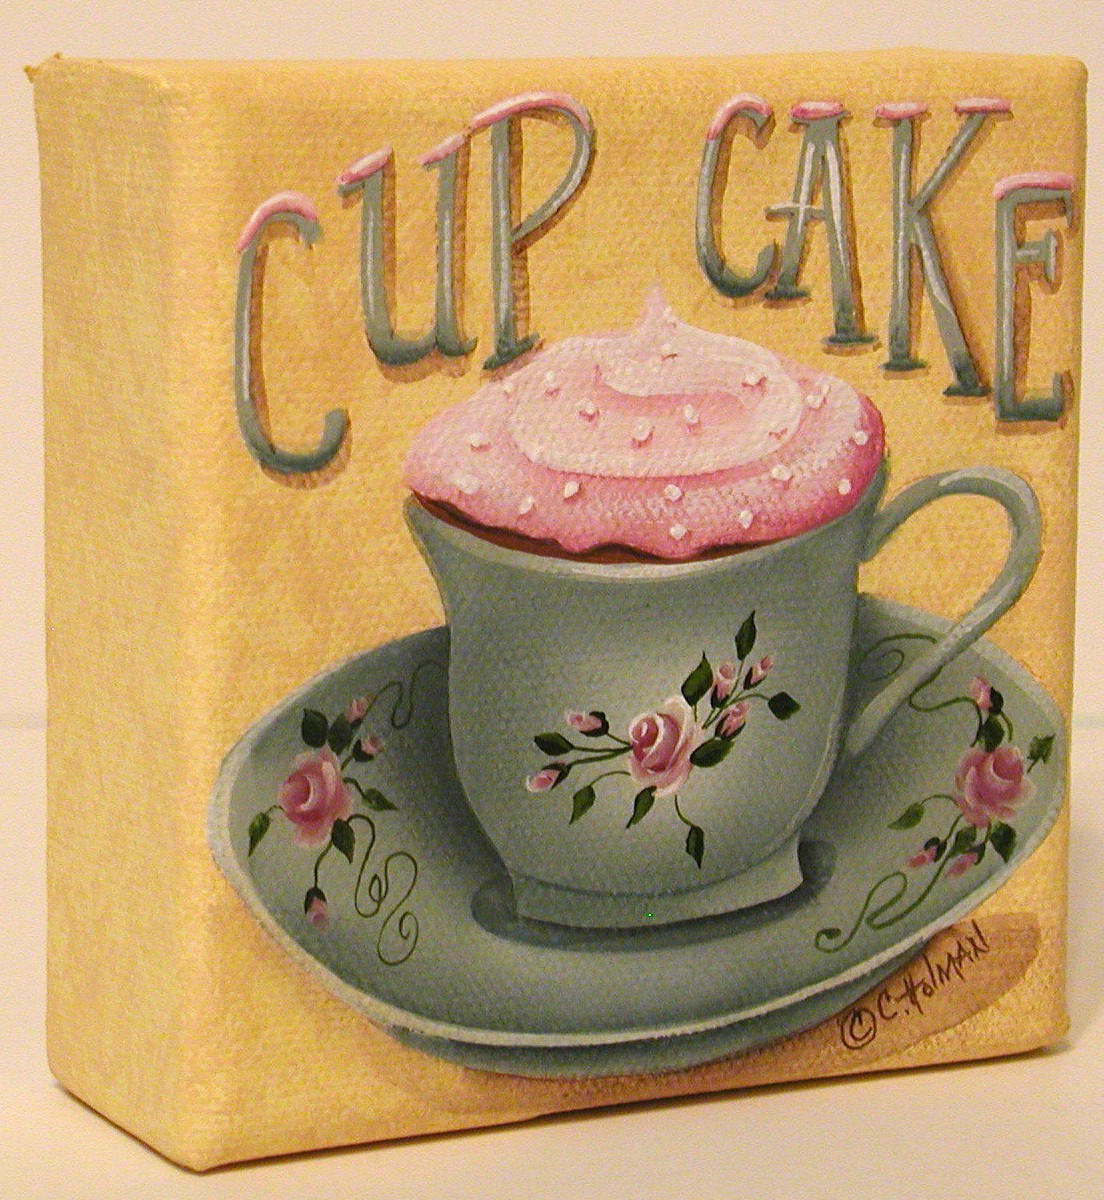 [Cup+of+Cake+2.jpg]